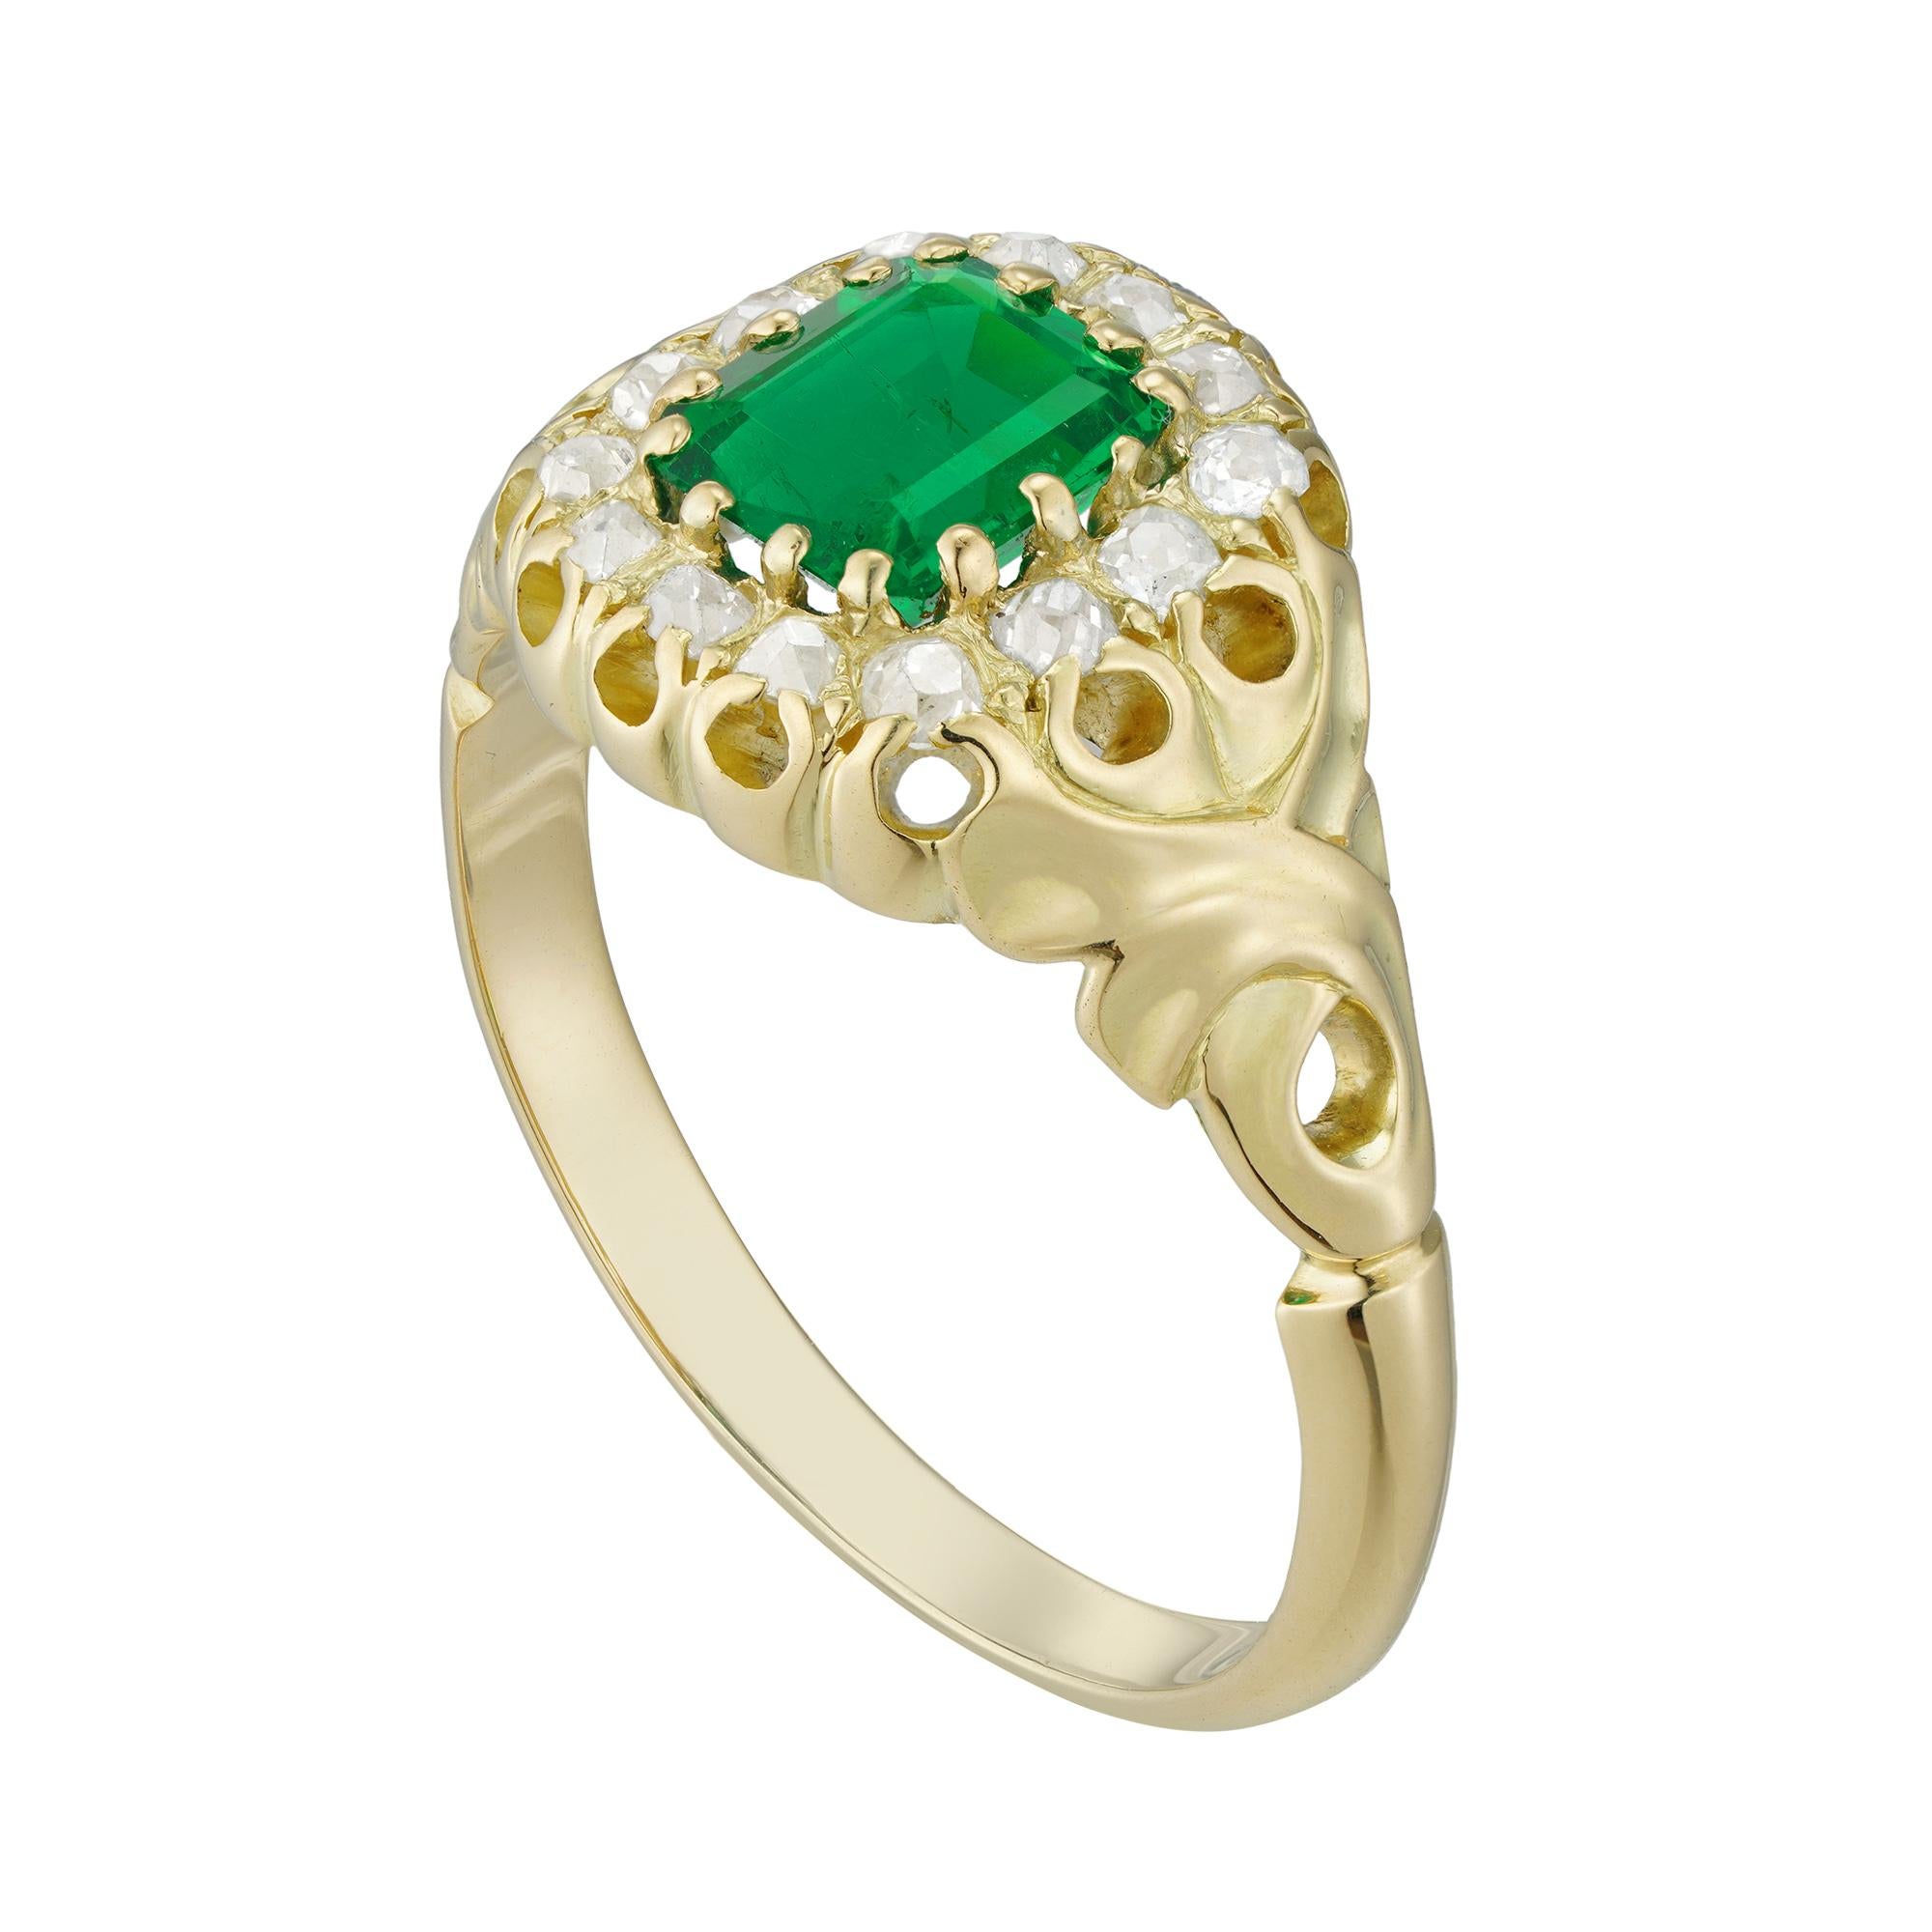 A Late Victorian emerald and diamond cluster ring, the octagonal-cut emerald weighing 0.86 carats, accompanied by GCS Report stating to be of Colombian origin, surrounded by fourteen old European-cut diamonds estimated to weigh 0.5 carats in total,